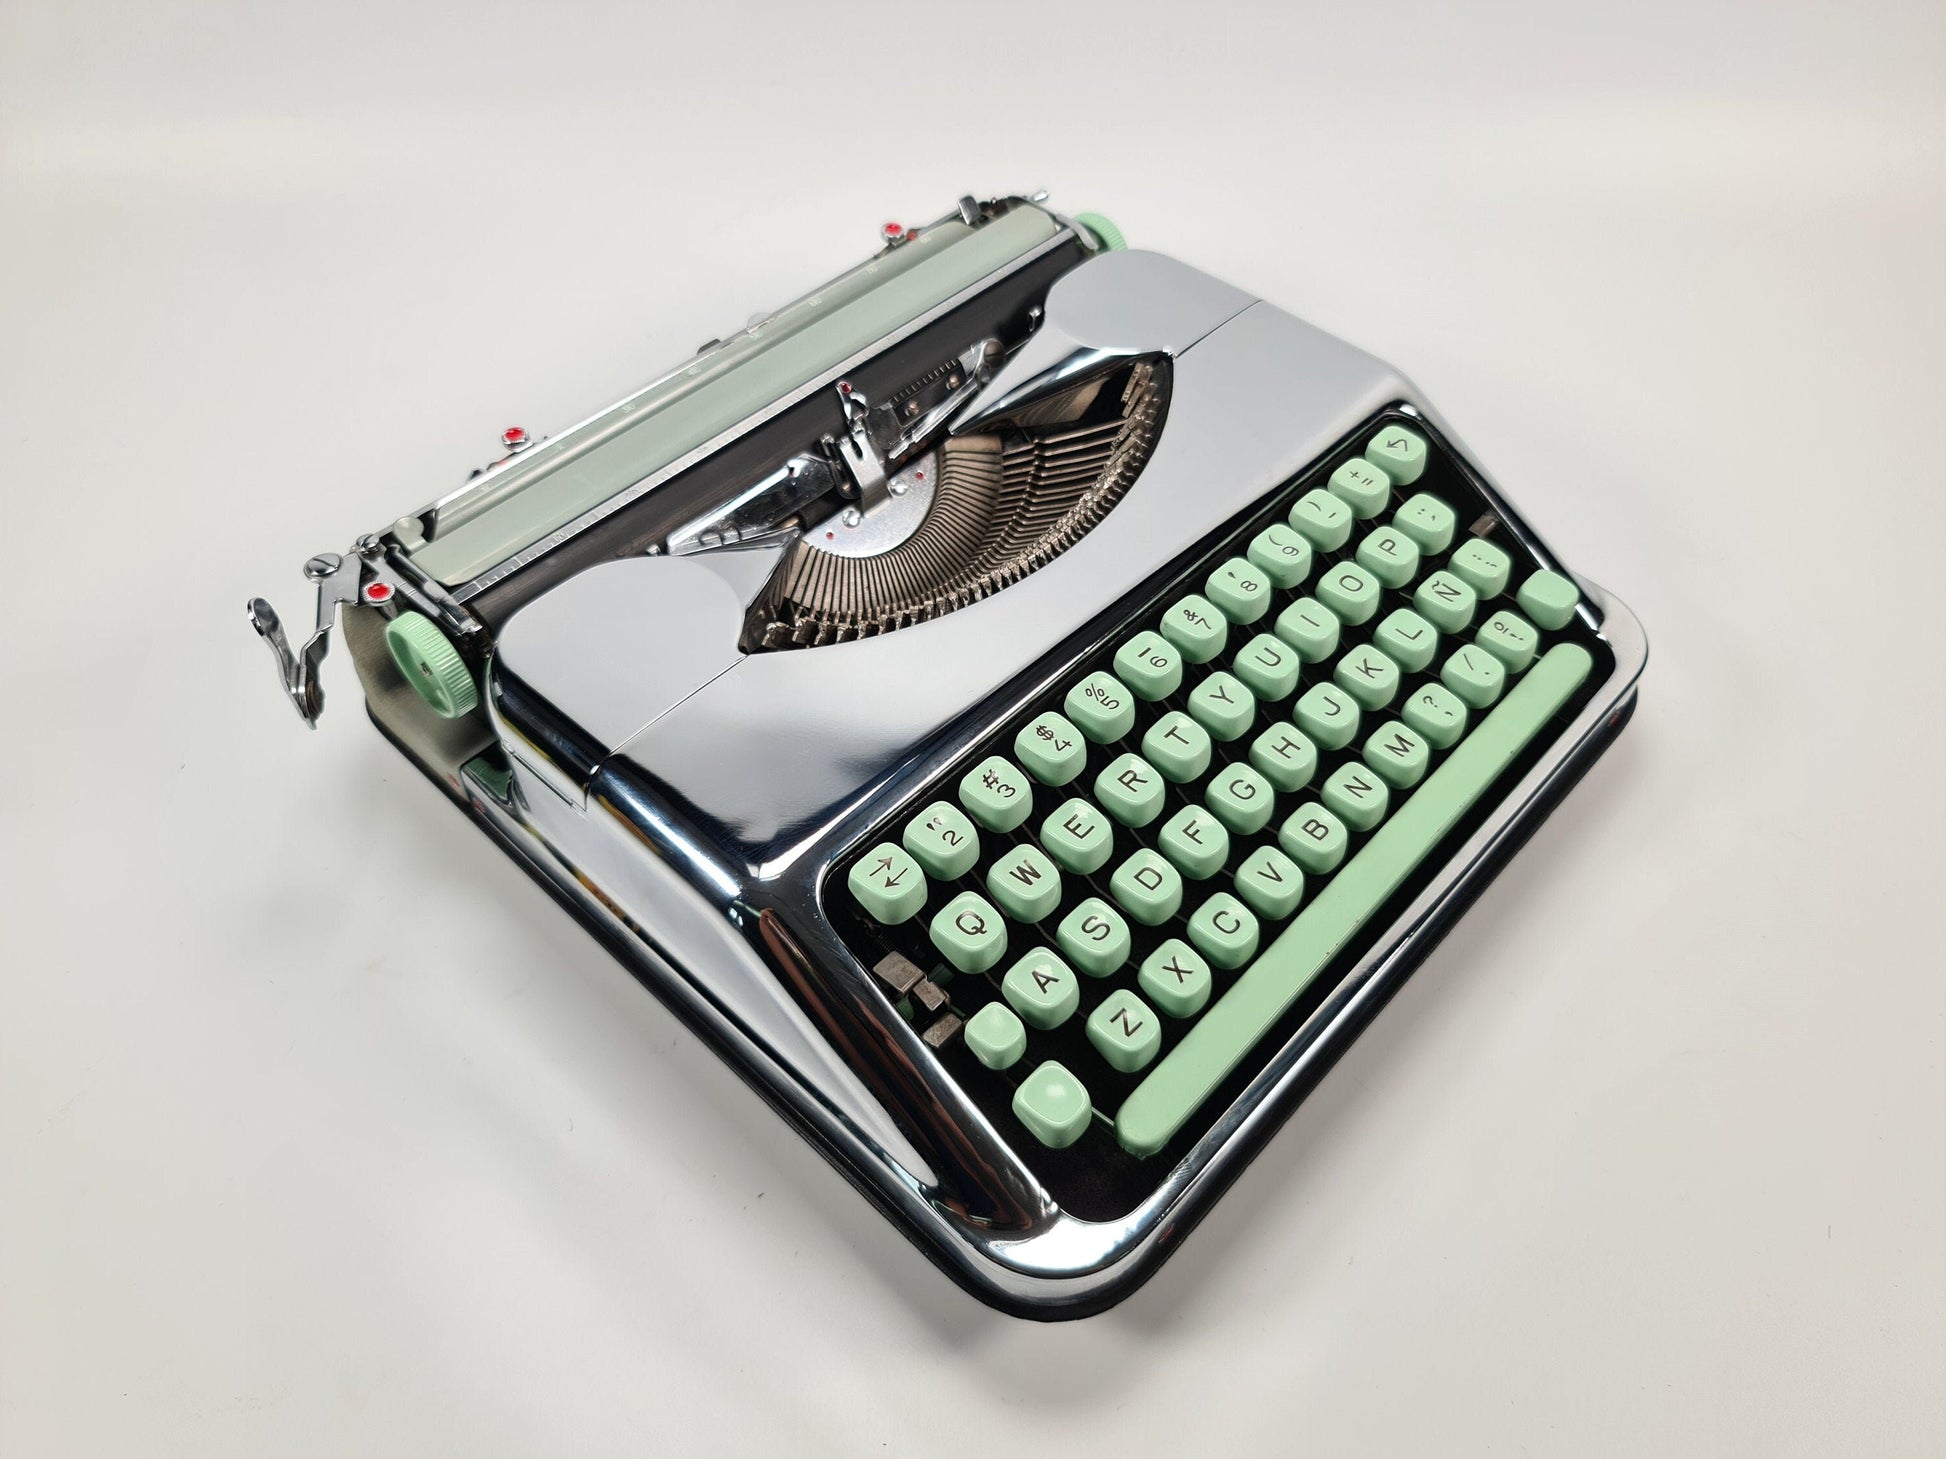 CHROME PLATED Iconic Limited Edition - Hermes Baby - silver - perfectly working typewriter - Professionally Serviced